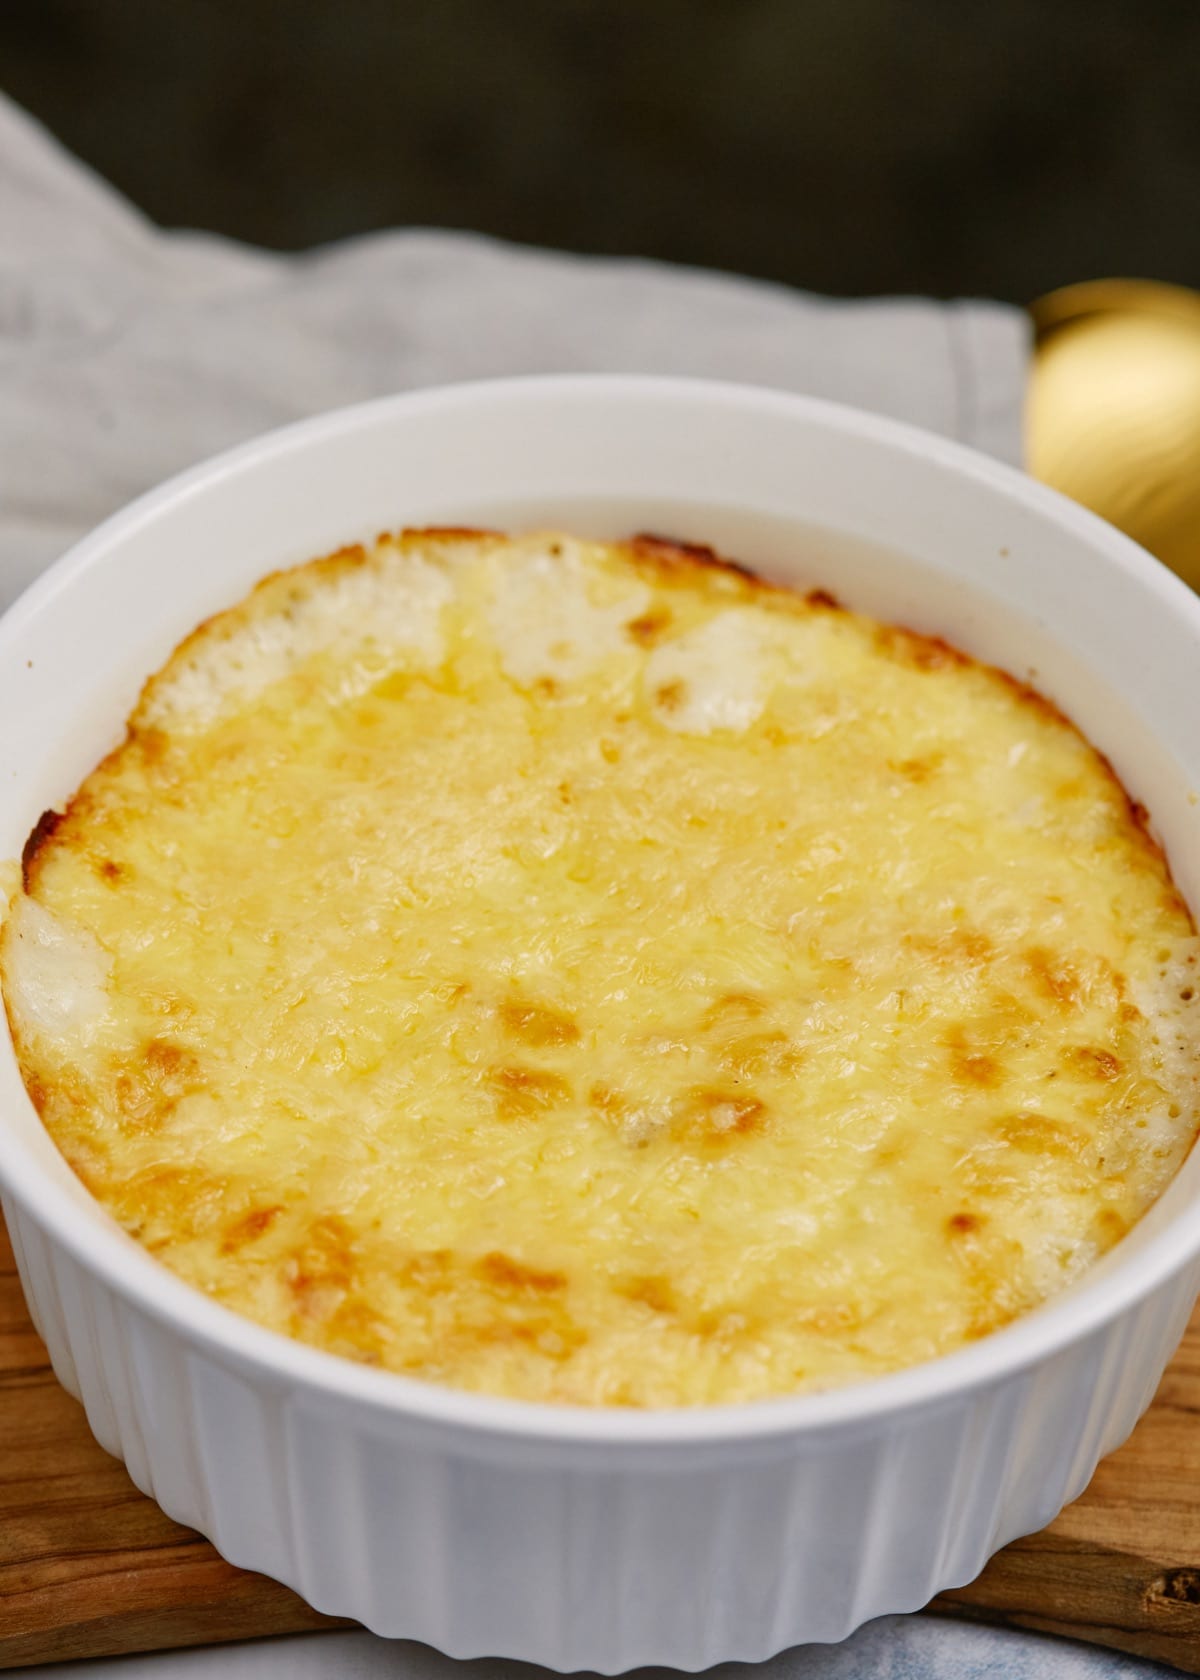 baked macaroni and cheese in round white baking dish on cutting board
